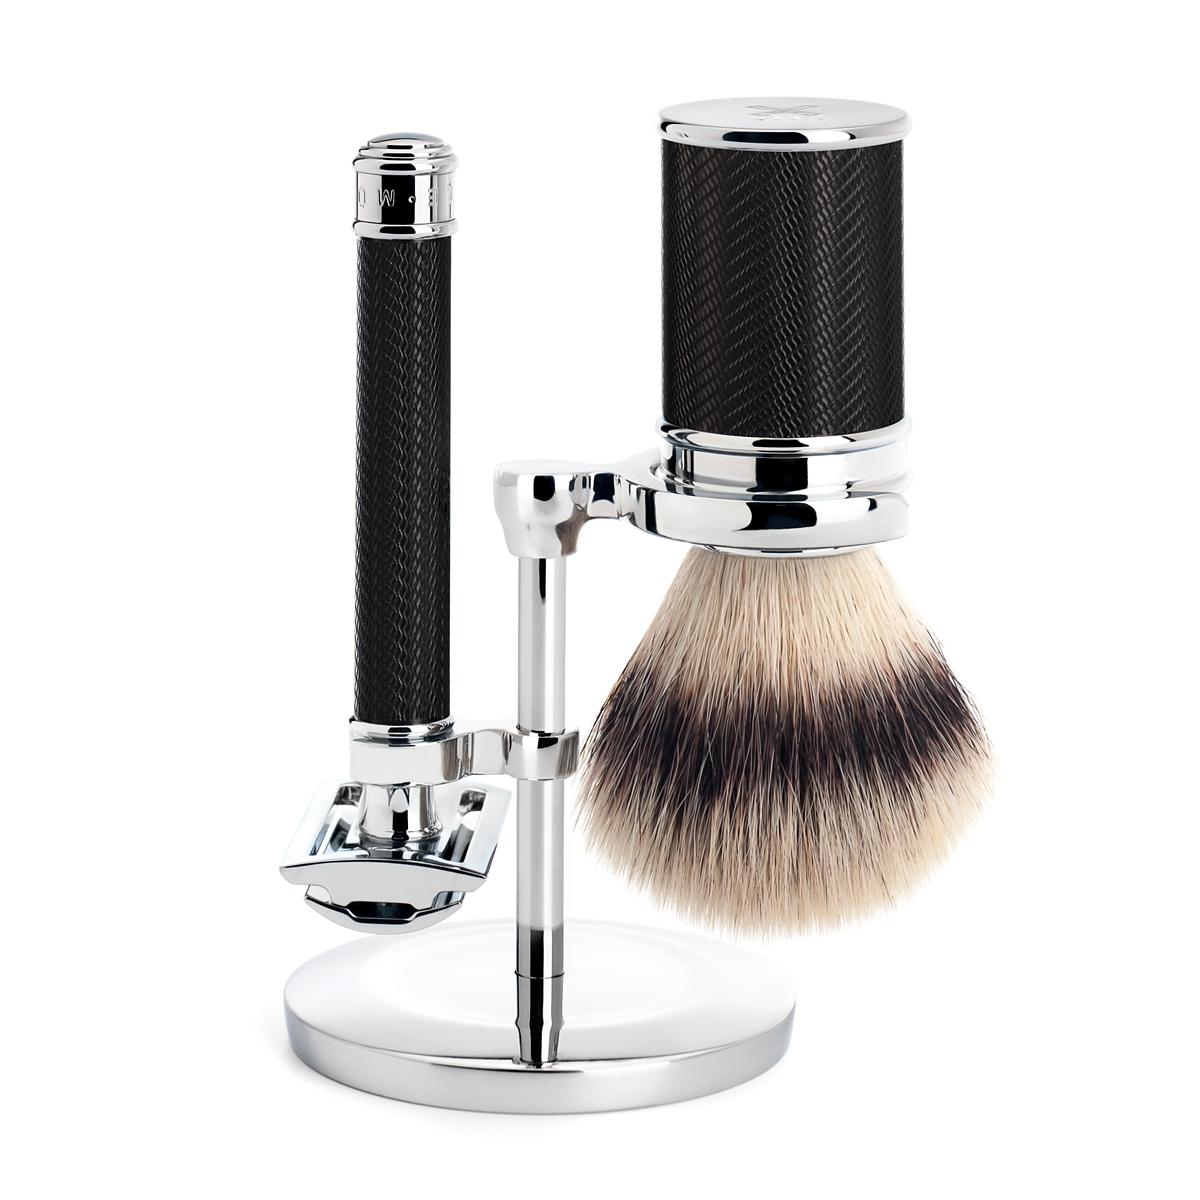 MUHLE Black and Chrome Silvertip Fibre and Safety Razor (Closed Comb) Shaving Set